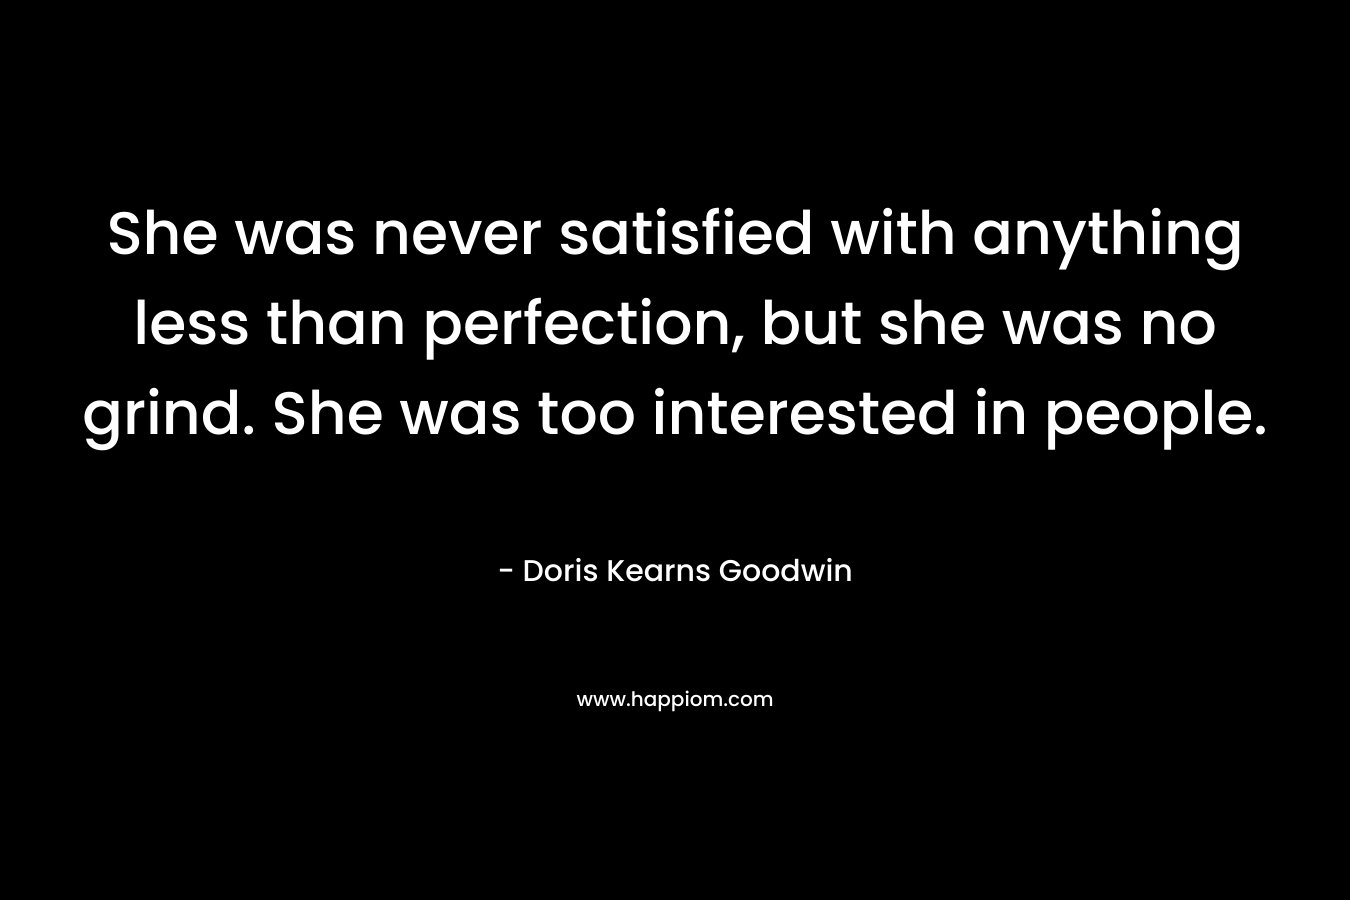 She was never satisfied with anything less than perfection, but she was no grind. She was too interested in people. – Doris Kearns Goodwin